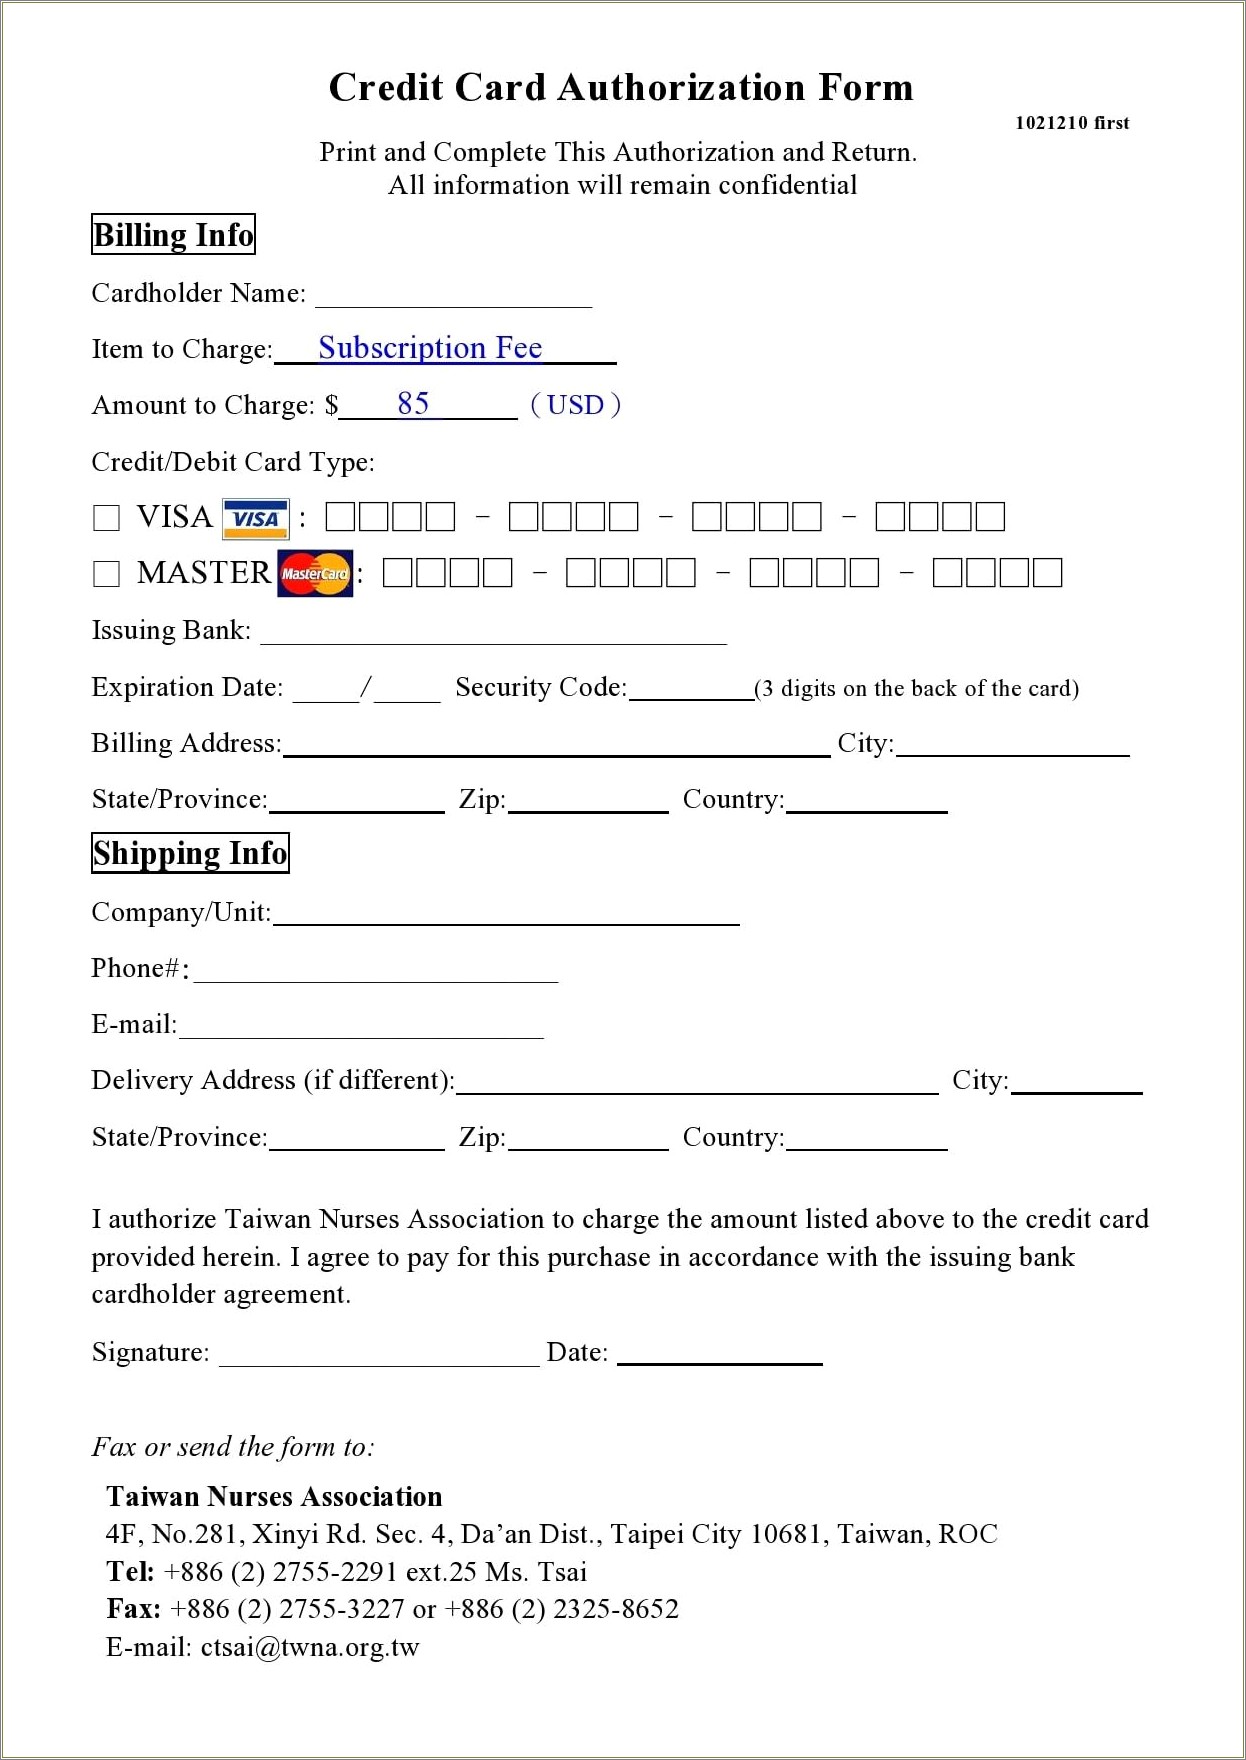 Credit Card Authorization Form Template Free Excel